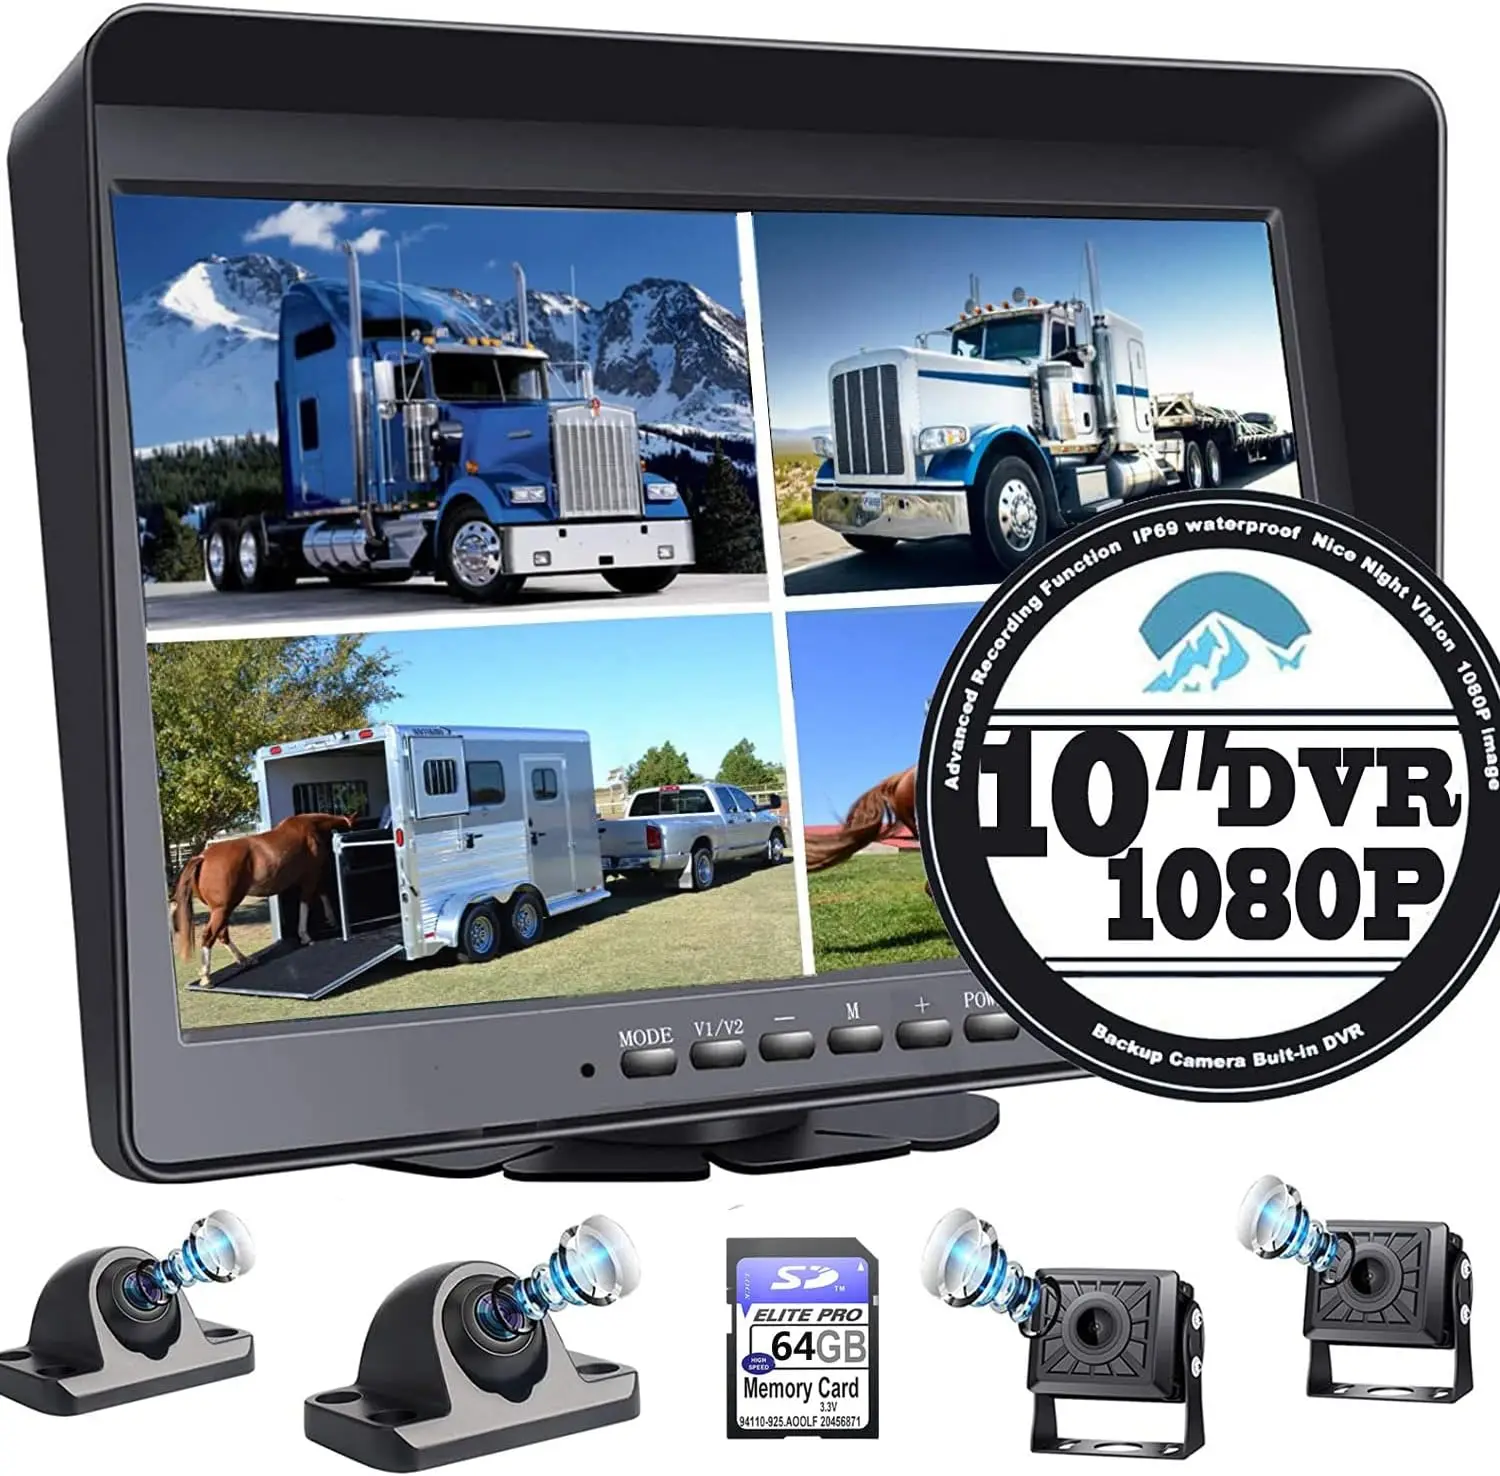 Car Backup Camera Monitor Built-in DVR for RV Truck Trailer Rear Side Front Reversing View Wired System FHD Image 4 Split Screen 5g dual band network surveillance cameras wireless wifi mobile automatic tracking mobile phone remote monitor 360 panoramic view